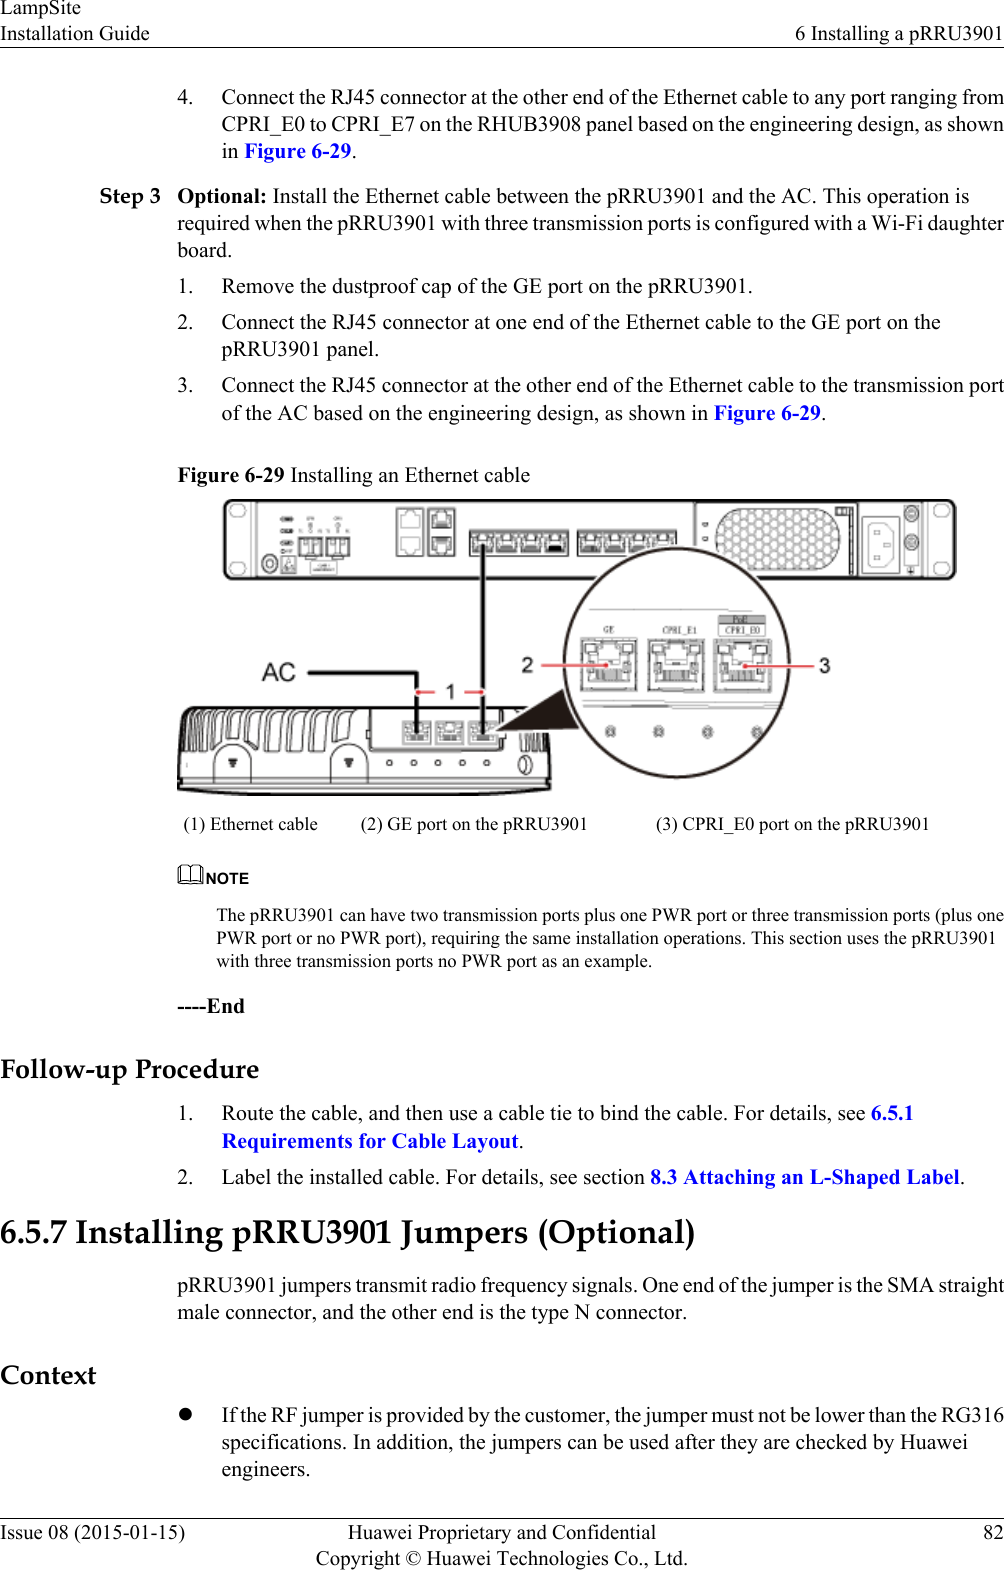 4. Connect the RJ45 connector at the other end of the Ethernet cable to any port ranging fromCPRI_E0 to CPRI_E7 on the RHUB3908 panel based on the engineering design, as shownin Figure 6-29.Step 3 Optional: Install the Ethernet cable between the pRRU3901 and the AC. This operation isrequired when the pRRU3901 with three transmission ports is configured with a Wi-Fi daughterboard.1. Remove the dustproof cap of the GE port on the pRRU3901.2. Connect the RJ45 connector at one end of the Ethernet cable to the GE port on thepRRU3901 panel.3. Connect the RJ45 connector at the other end of the Ethernet cable to the transmission portof the AC based on the engineering design, as shown in Figure 6-29.Figure 6-29 Installing an Ethernet cable(1) Ethernet cable (2) GE port on the pRRU3901 (3) CPRI_E0 port on the pRRU3901NOTEThe pRRU3901 can have two transmission ports plus one PWR port or three transmission ports (plus onePWR port or no PWR port), requiring the same installation operations. This section uses the pRRU3901with three transmission ports no PWR port as an example.----EndFollow-up Procedure1. Route the cable, and then use a cable tie to bind the cable. For details, see 6.5.1Requirements for Cable Layout.2. Label the installed cable. For details, see section 8.3 Attaching an L-Shaped Label.6.5.7 Installing pRRU3901 Jumpers (Optional)pRRU3901 jumpers transmit radio frequency signals. One end of the jumper is the SMA straightmale connector, and the other end is the type N connector.ContextlIf the RF jumper is provided by the customer, the jumper must not be lower than the RG316specifications. In addition, the jumpers can be used after they are checked by Huaweiengineers.LampSiteInstallation Guide 6 Installing a pRRU3901Issue 08 (2015-01-15) Huawei Proprietary and ConfidentialCopyright © Huawei Technologies Co., Ltd.82